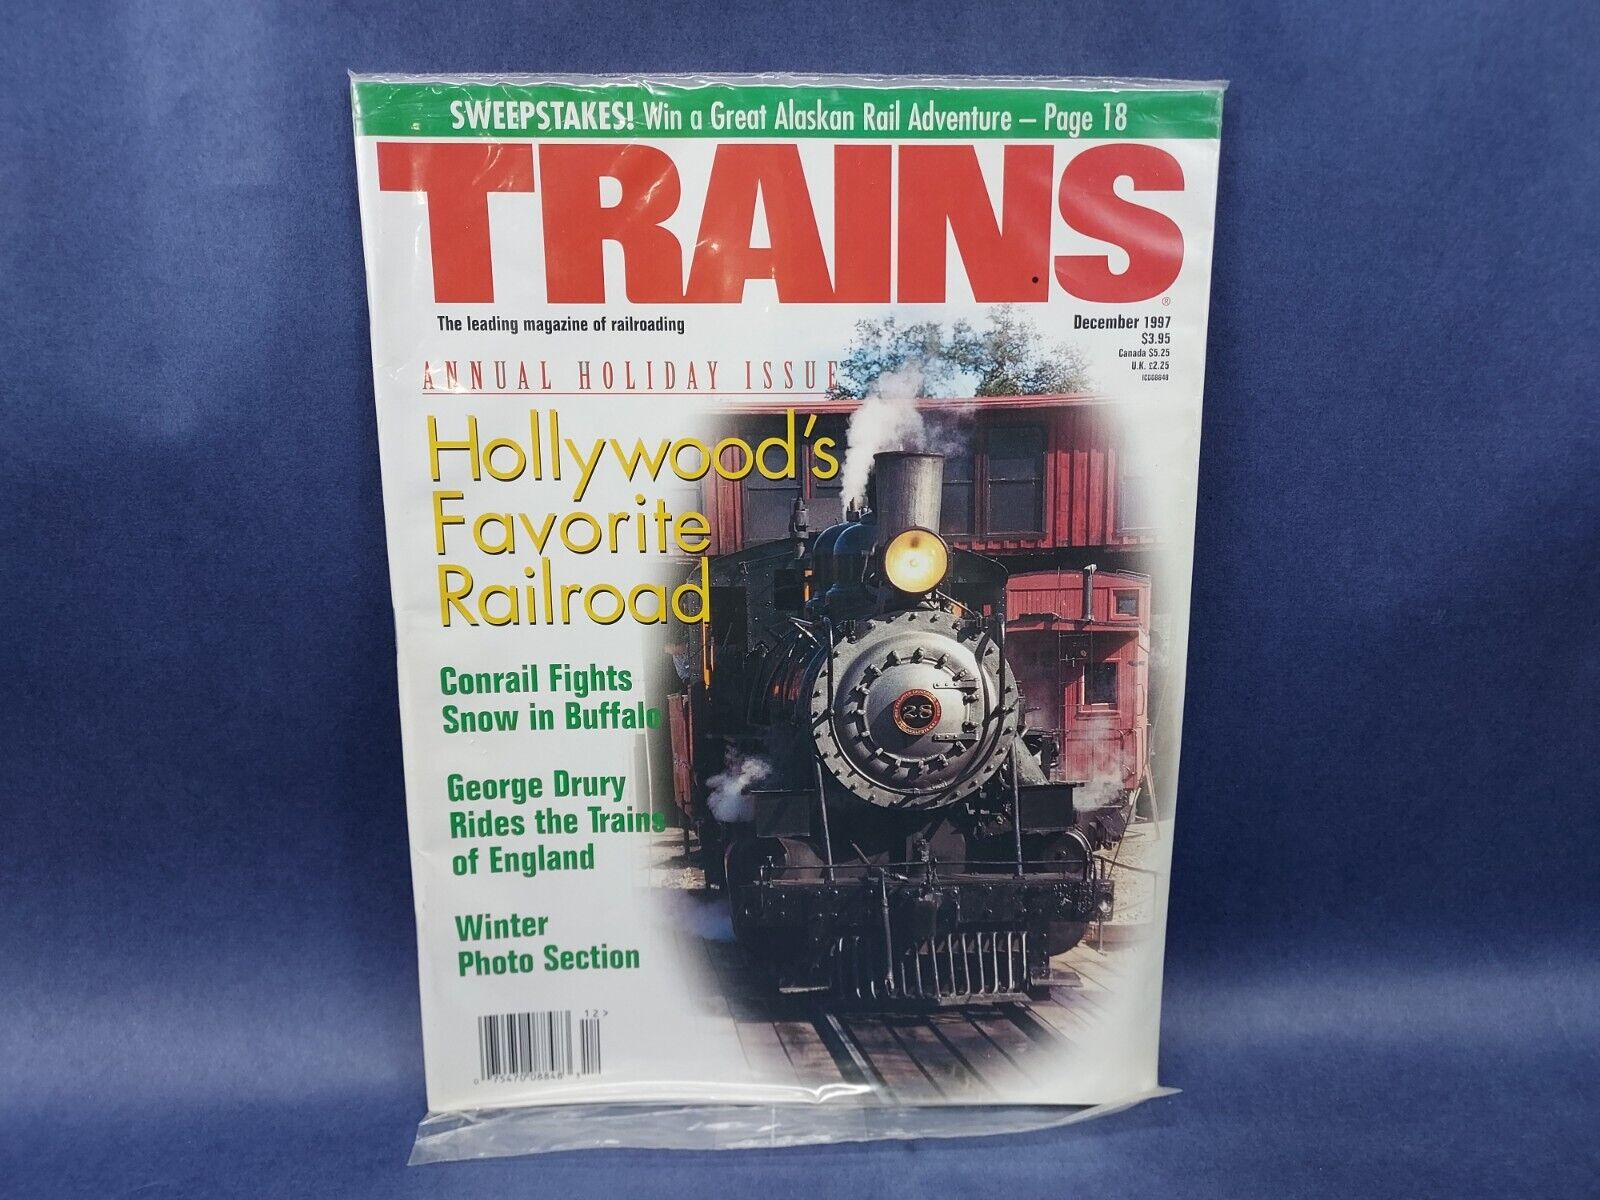 TRAINS Magazine Dec 1997 NEW Sealed In Original Mailer ~ Holiday Issue